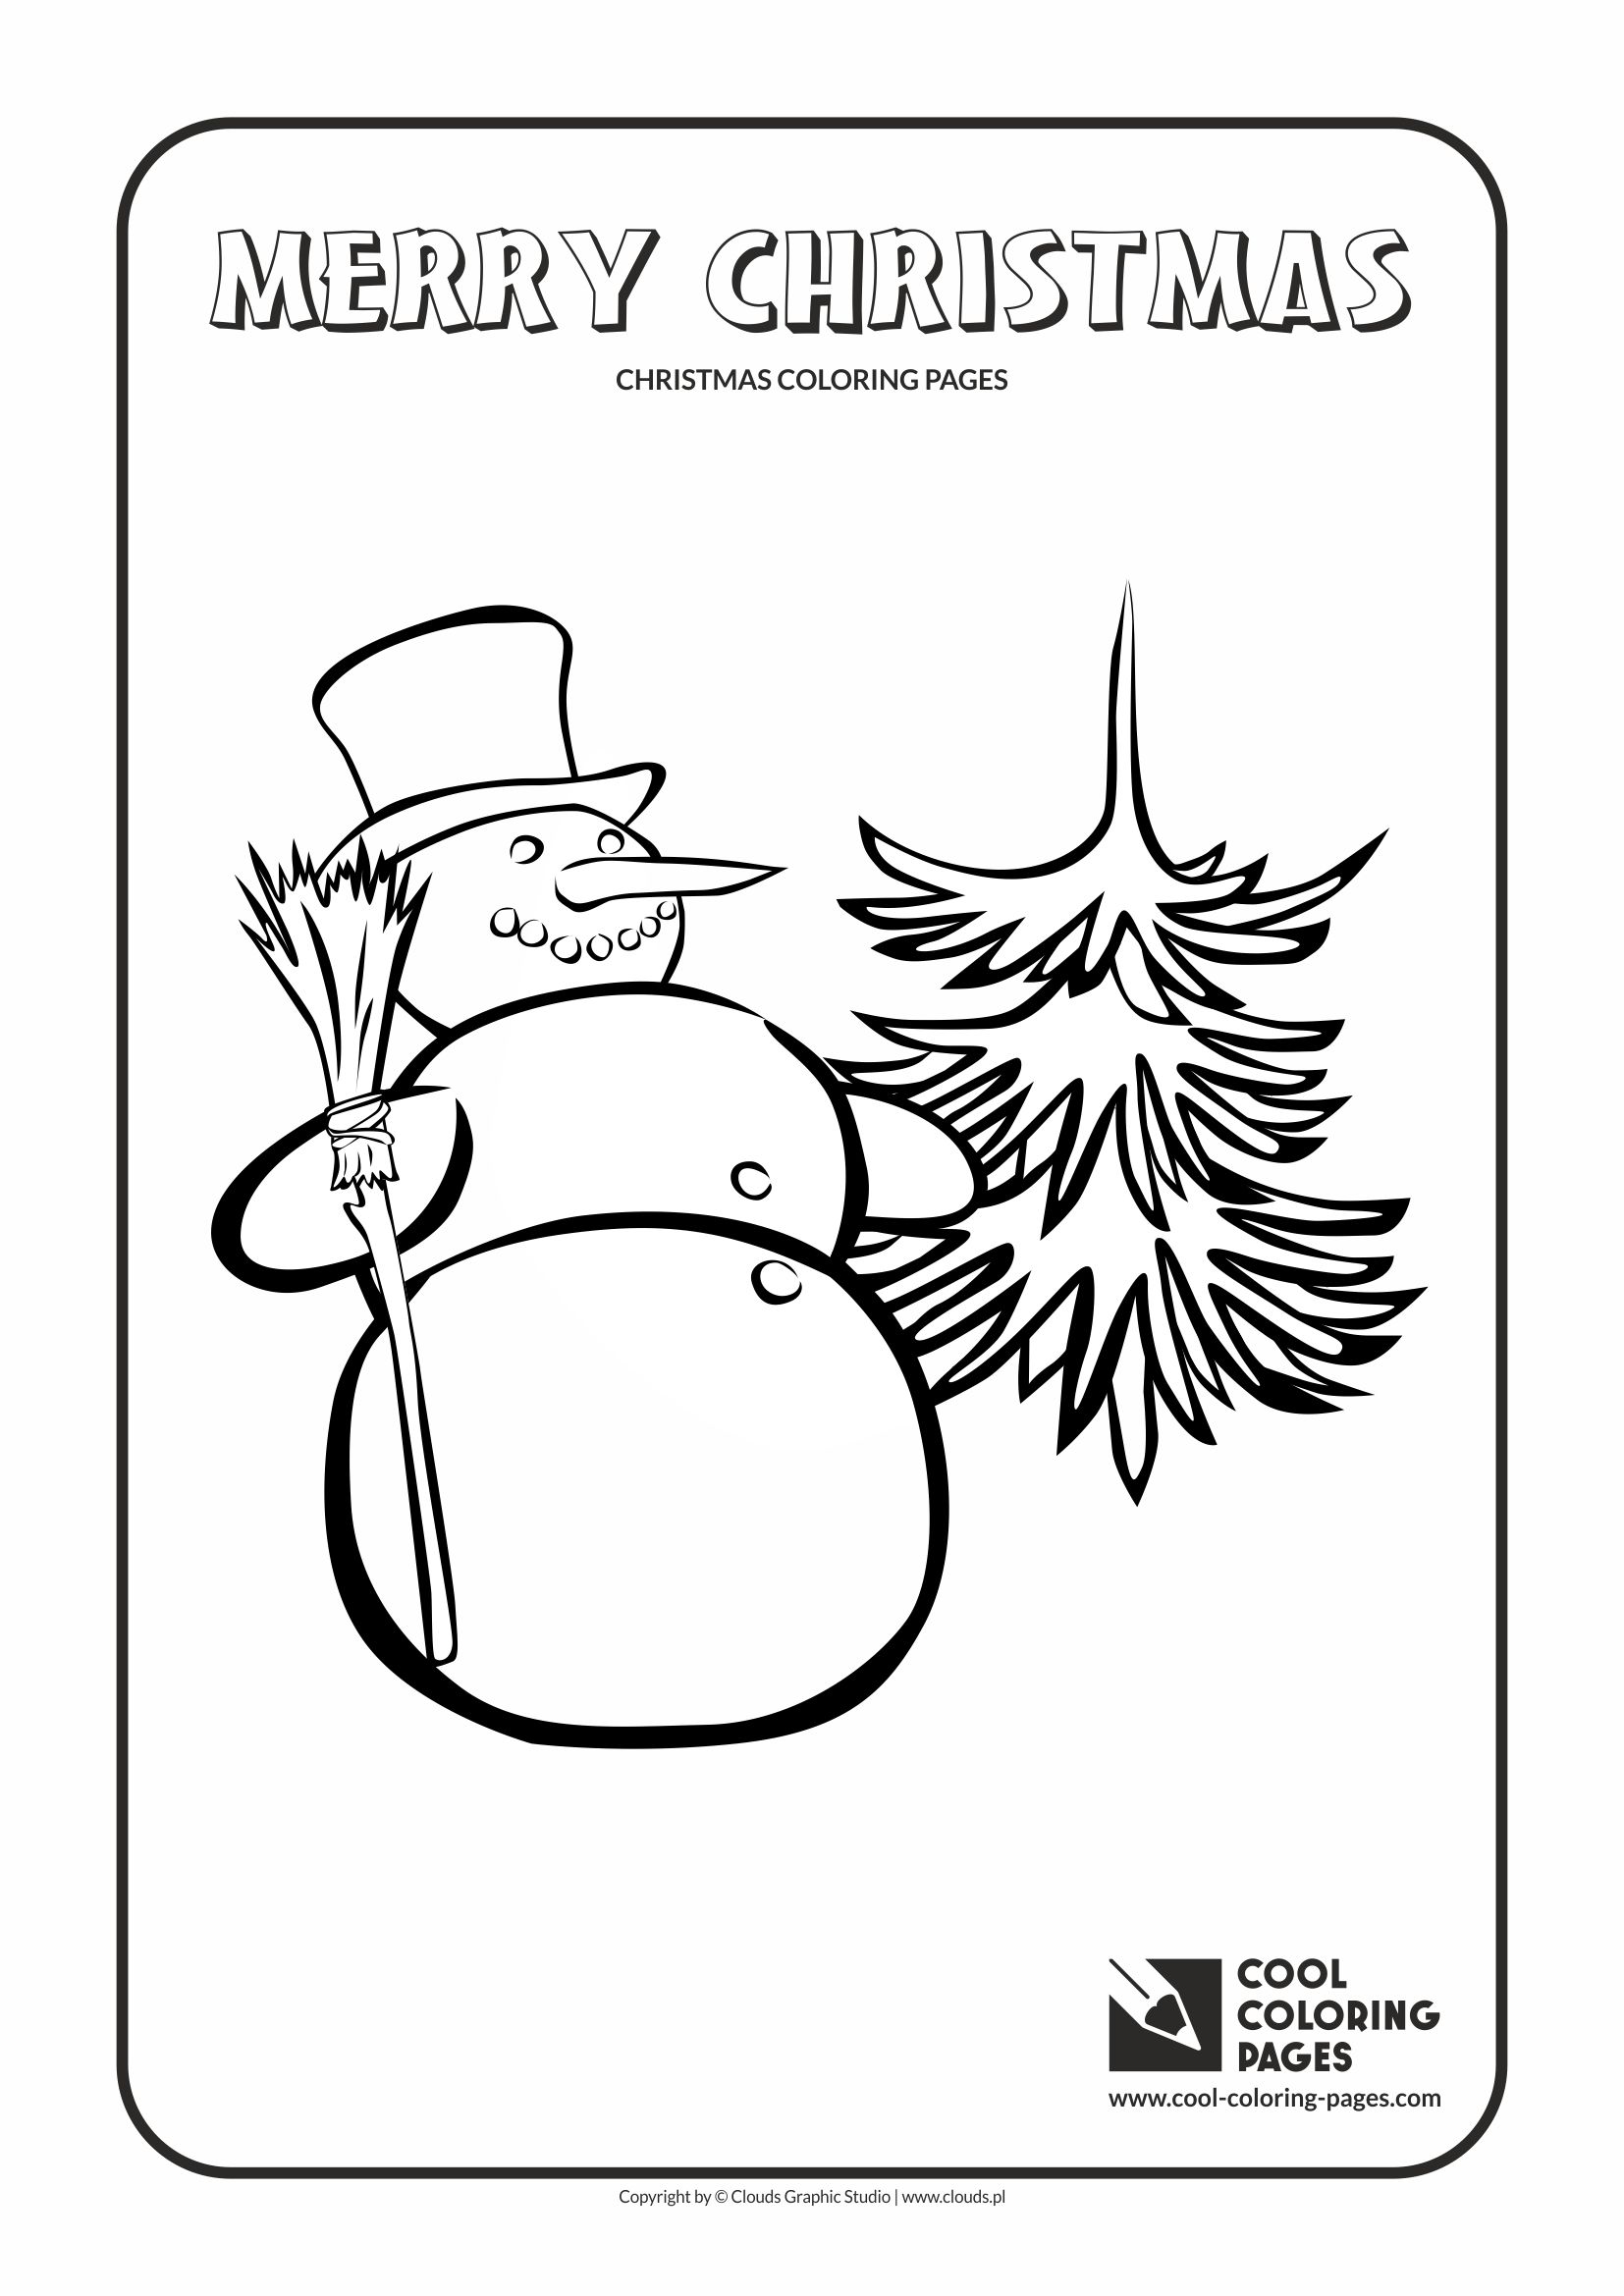 Cool Coloring Pages - Holidays / Christmas snowman / Coloring page with Christmas snowman